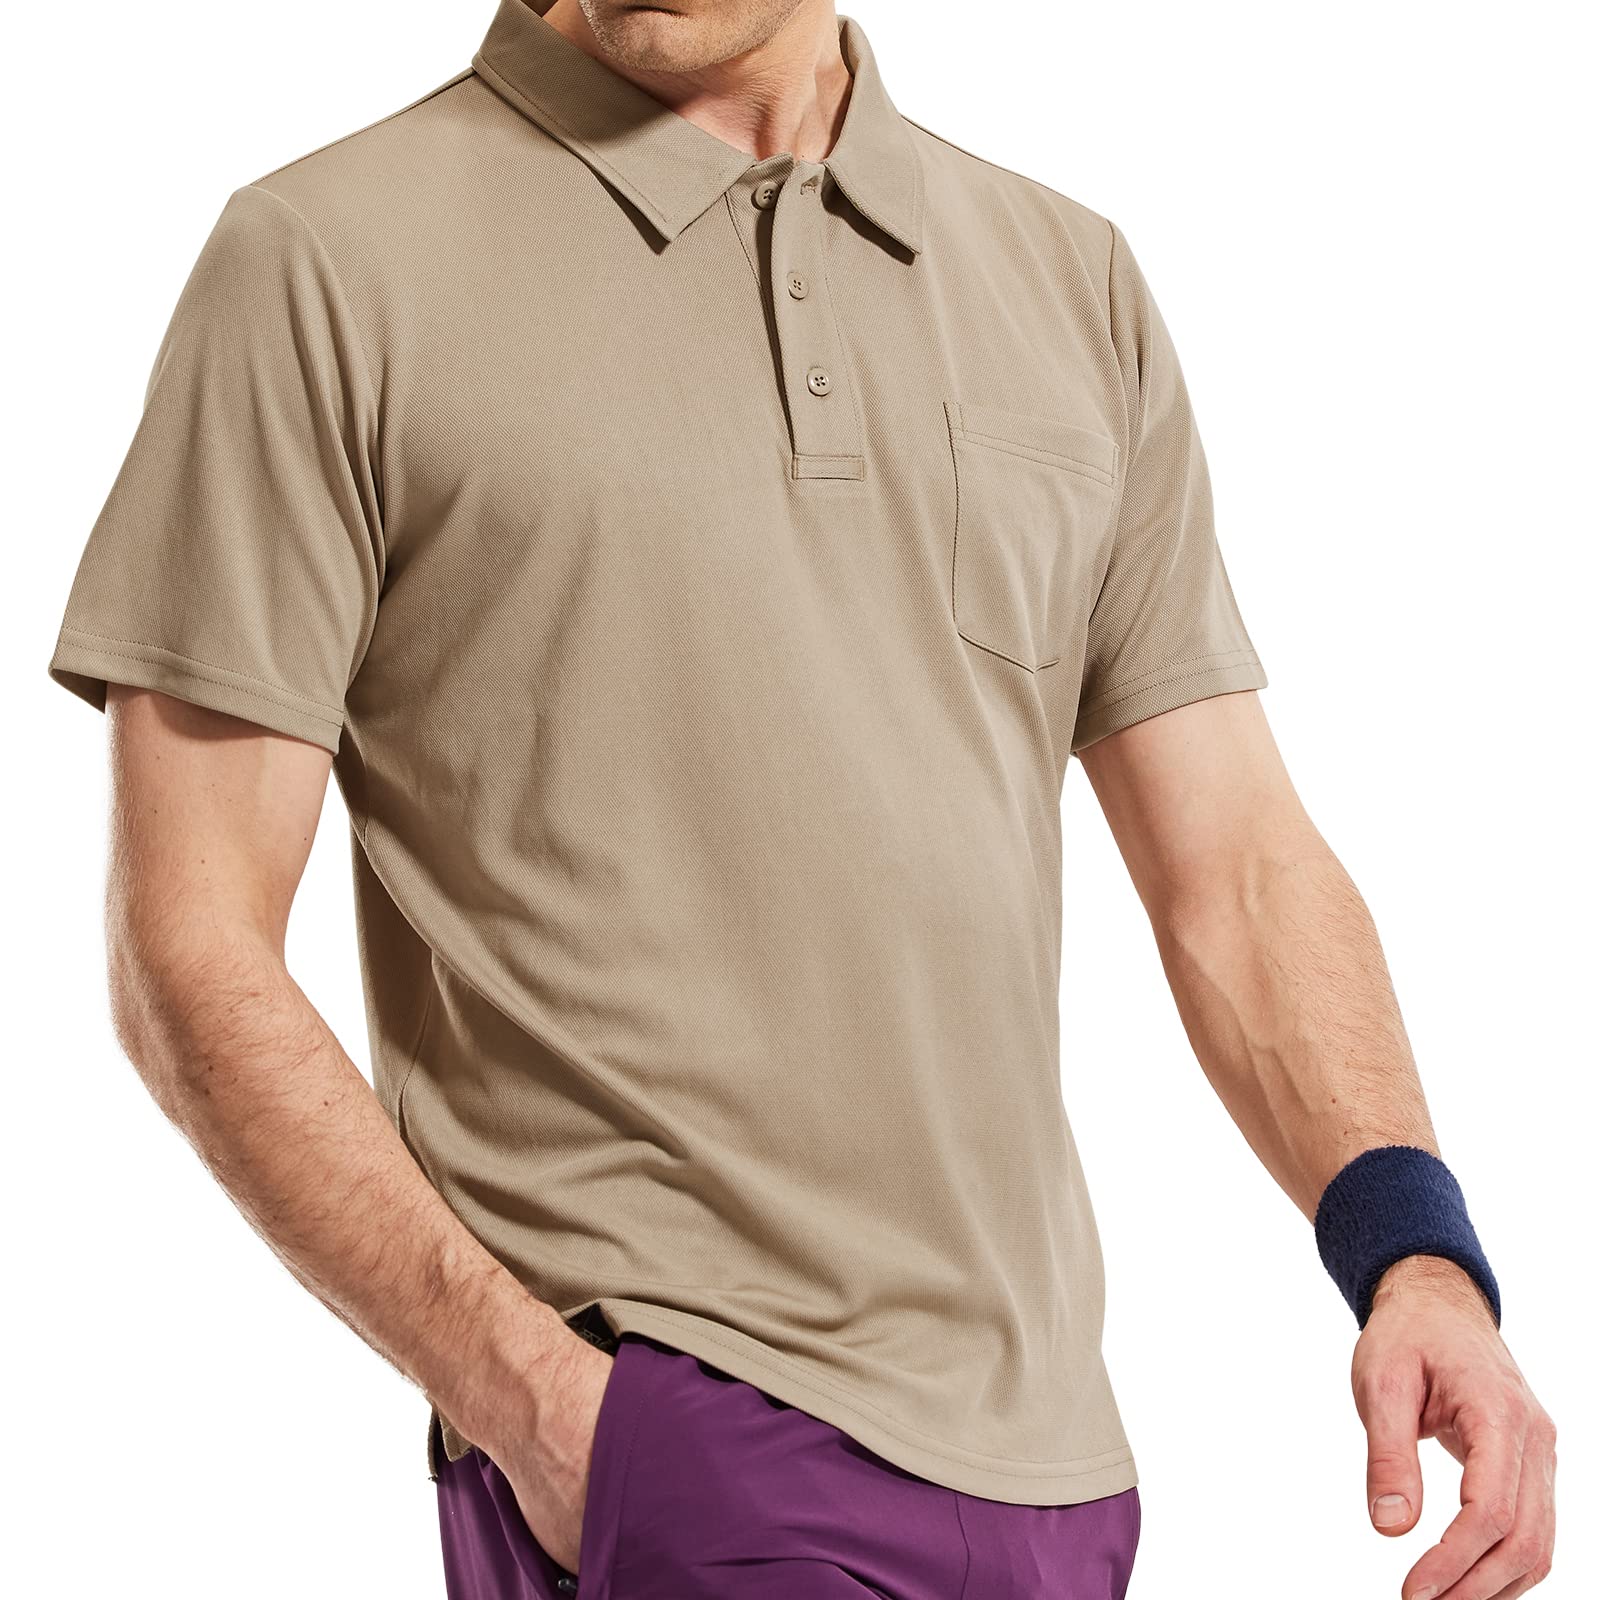 Haimont Men's Polo Shirts with Pocket Collared Golf T-Shirts